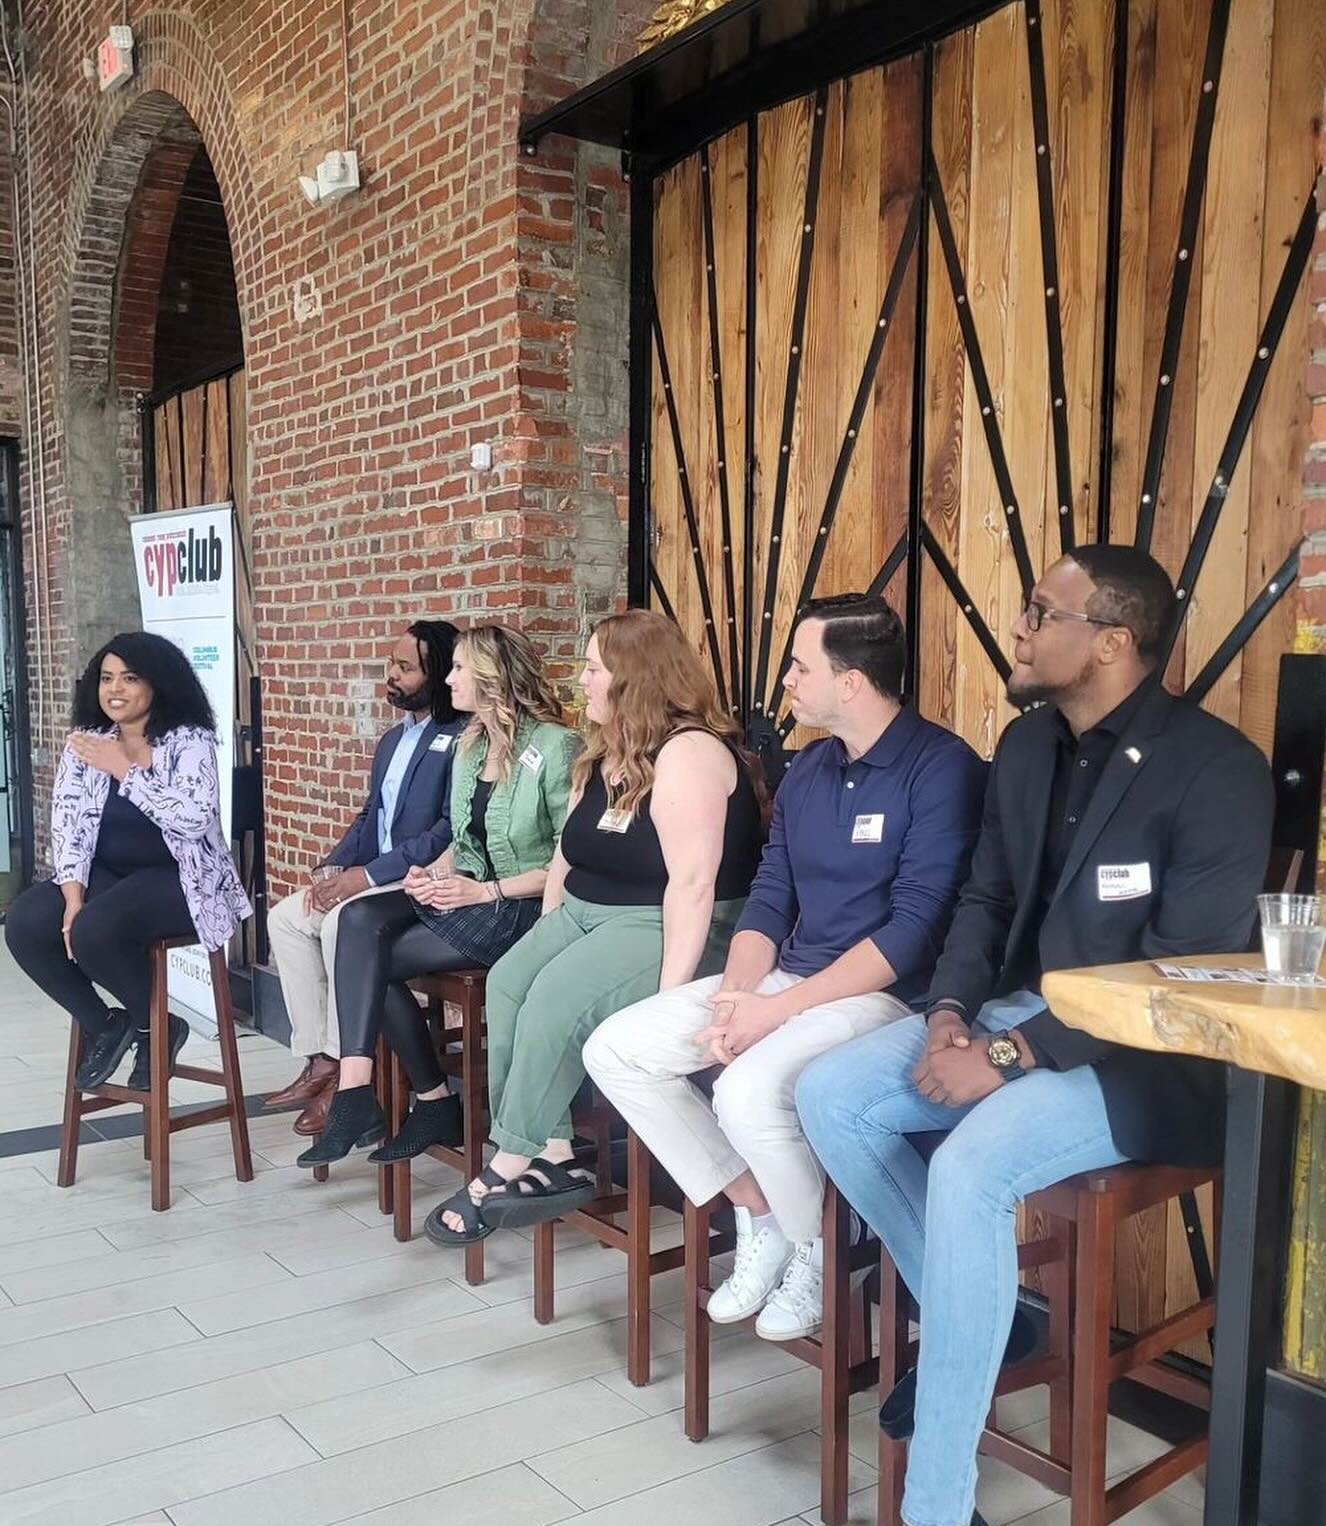 Thanks to everyone who joined us earlier this week for Cocktails &amp; Conversations at @ohiobrewingcolumbus! We had another excellent discussion with a great group of young professionals and community leaders.

🗣️ Special thanks to our panelists &a